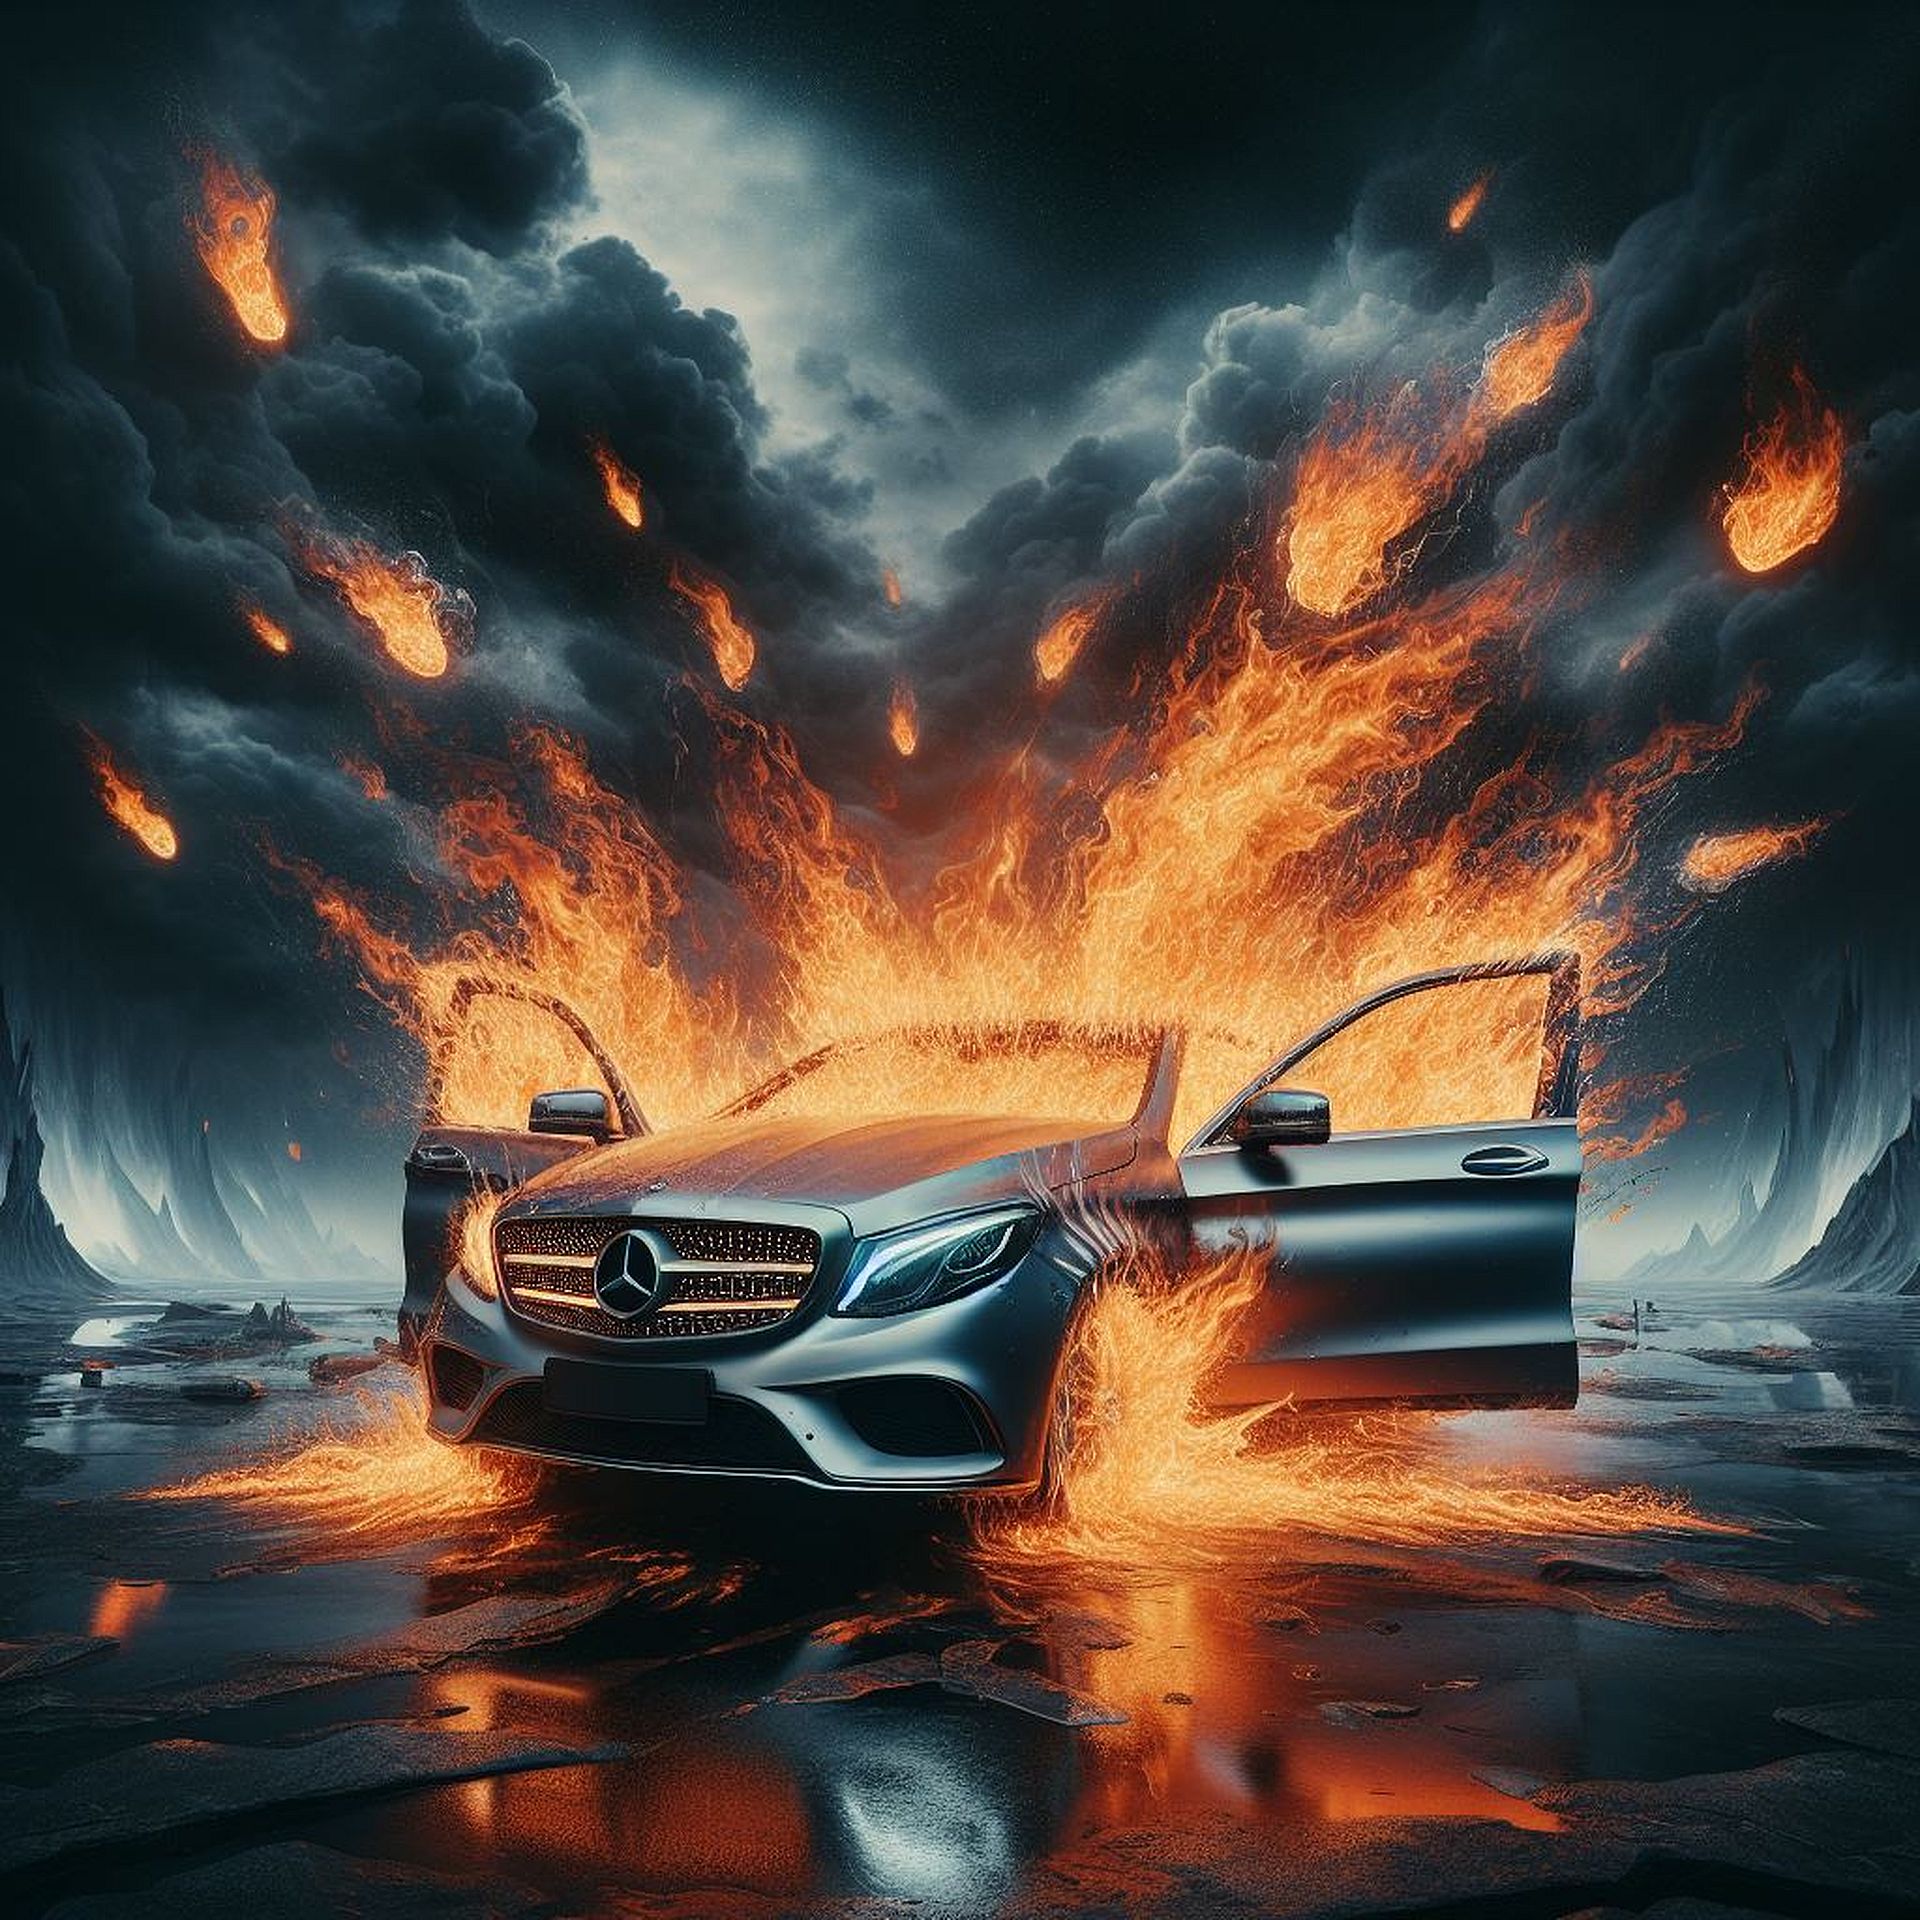 The Mercedes-Benz recall will affect 250,000 vehicles globally for safety issues like engine malfunctions and fire risks. Learn about affected models.